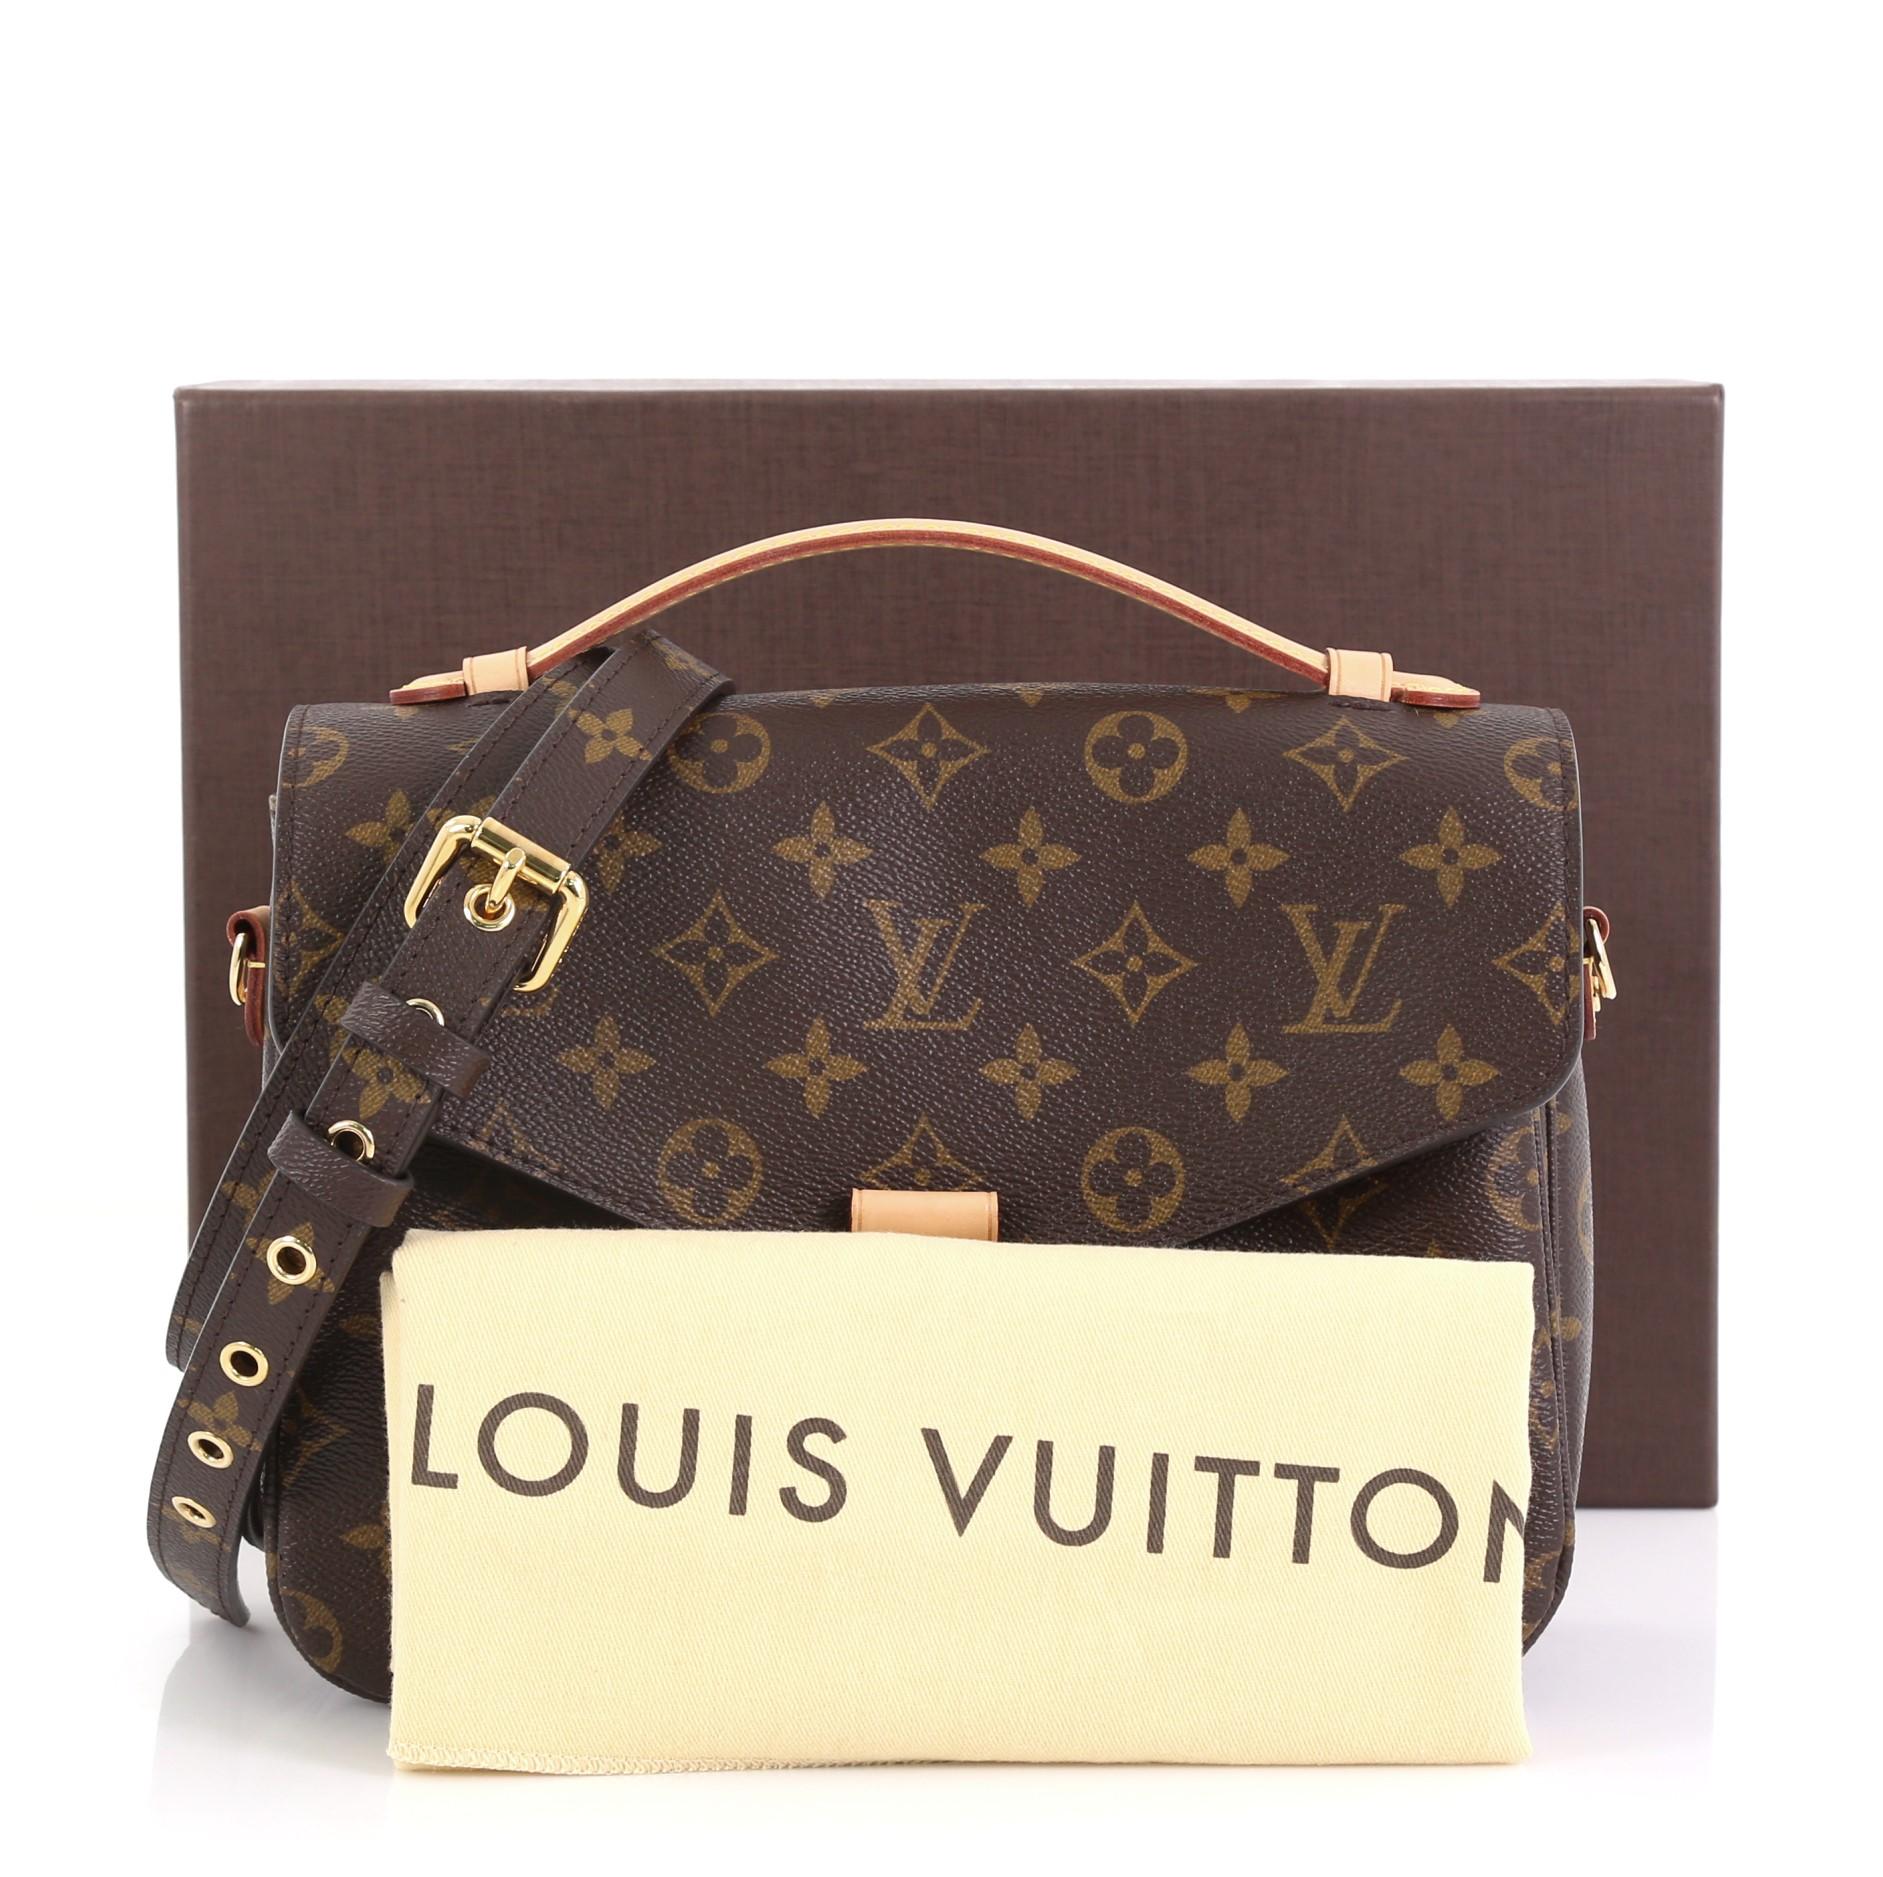 This Louis Vuitton Pochette Metis Monogram Canvas, crafted in brown monogram coated canvas, features a leather top handle, exterior back zip pocket, and gold-tone hardware. Its S-lock closure opens to a brown microfiber interior with two open